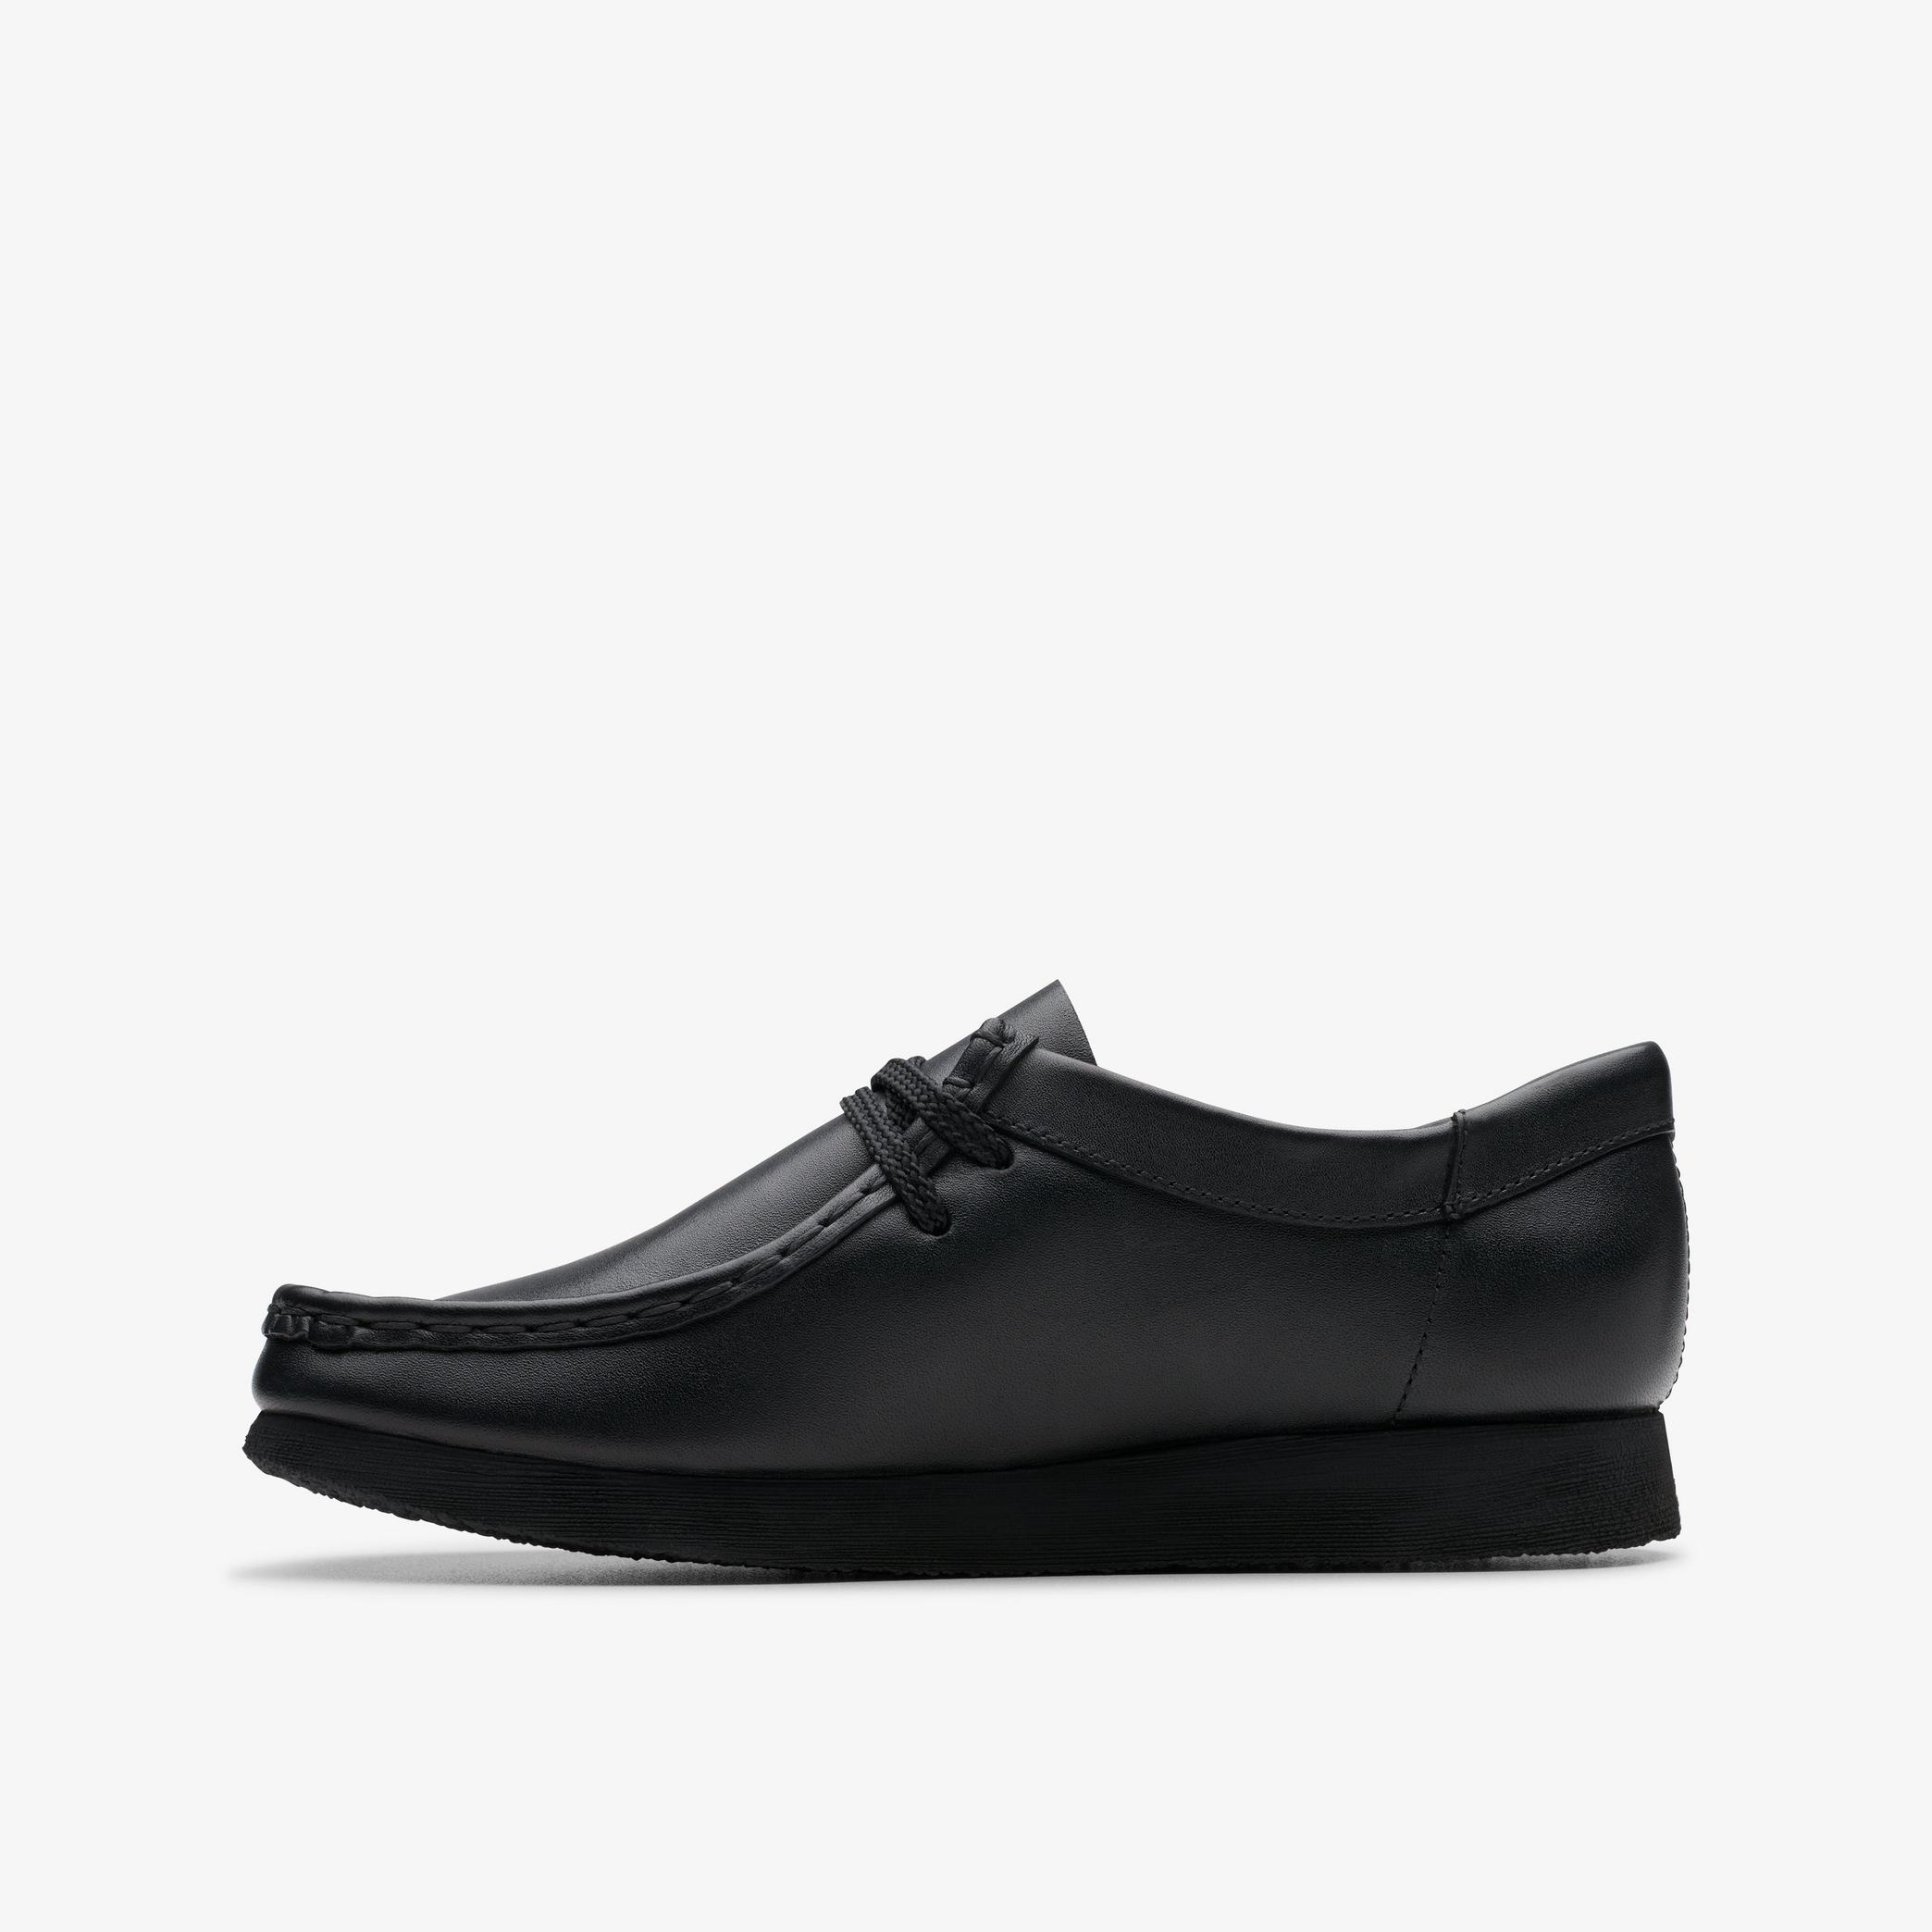 Wallabee Older Black Leather Shoes, view 2 of 6